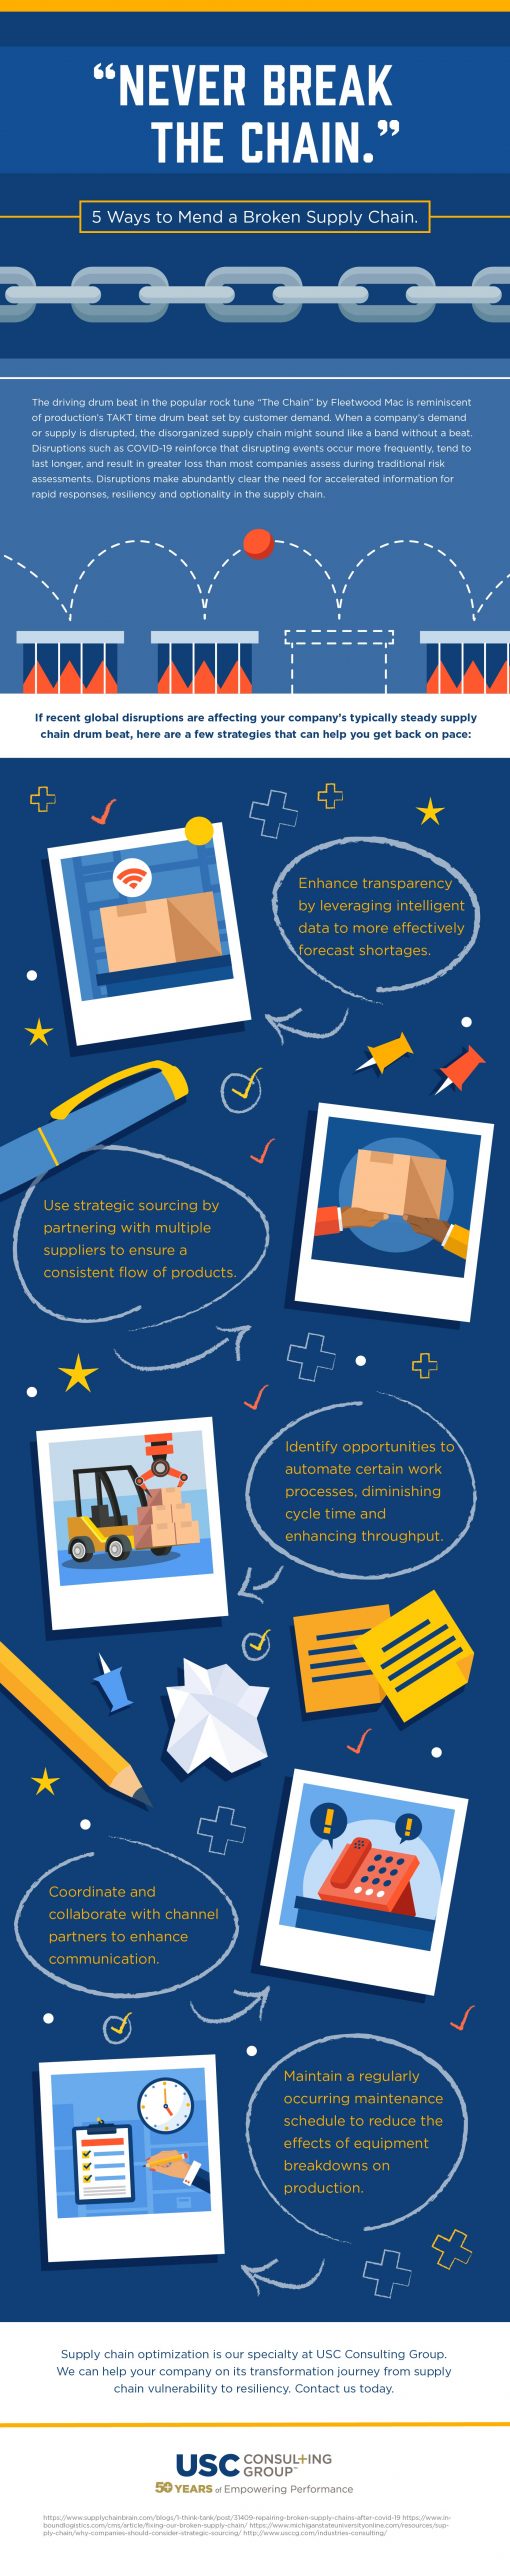 Never Break the Chain - 5 ways to mend a broken supply chain infographic